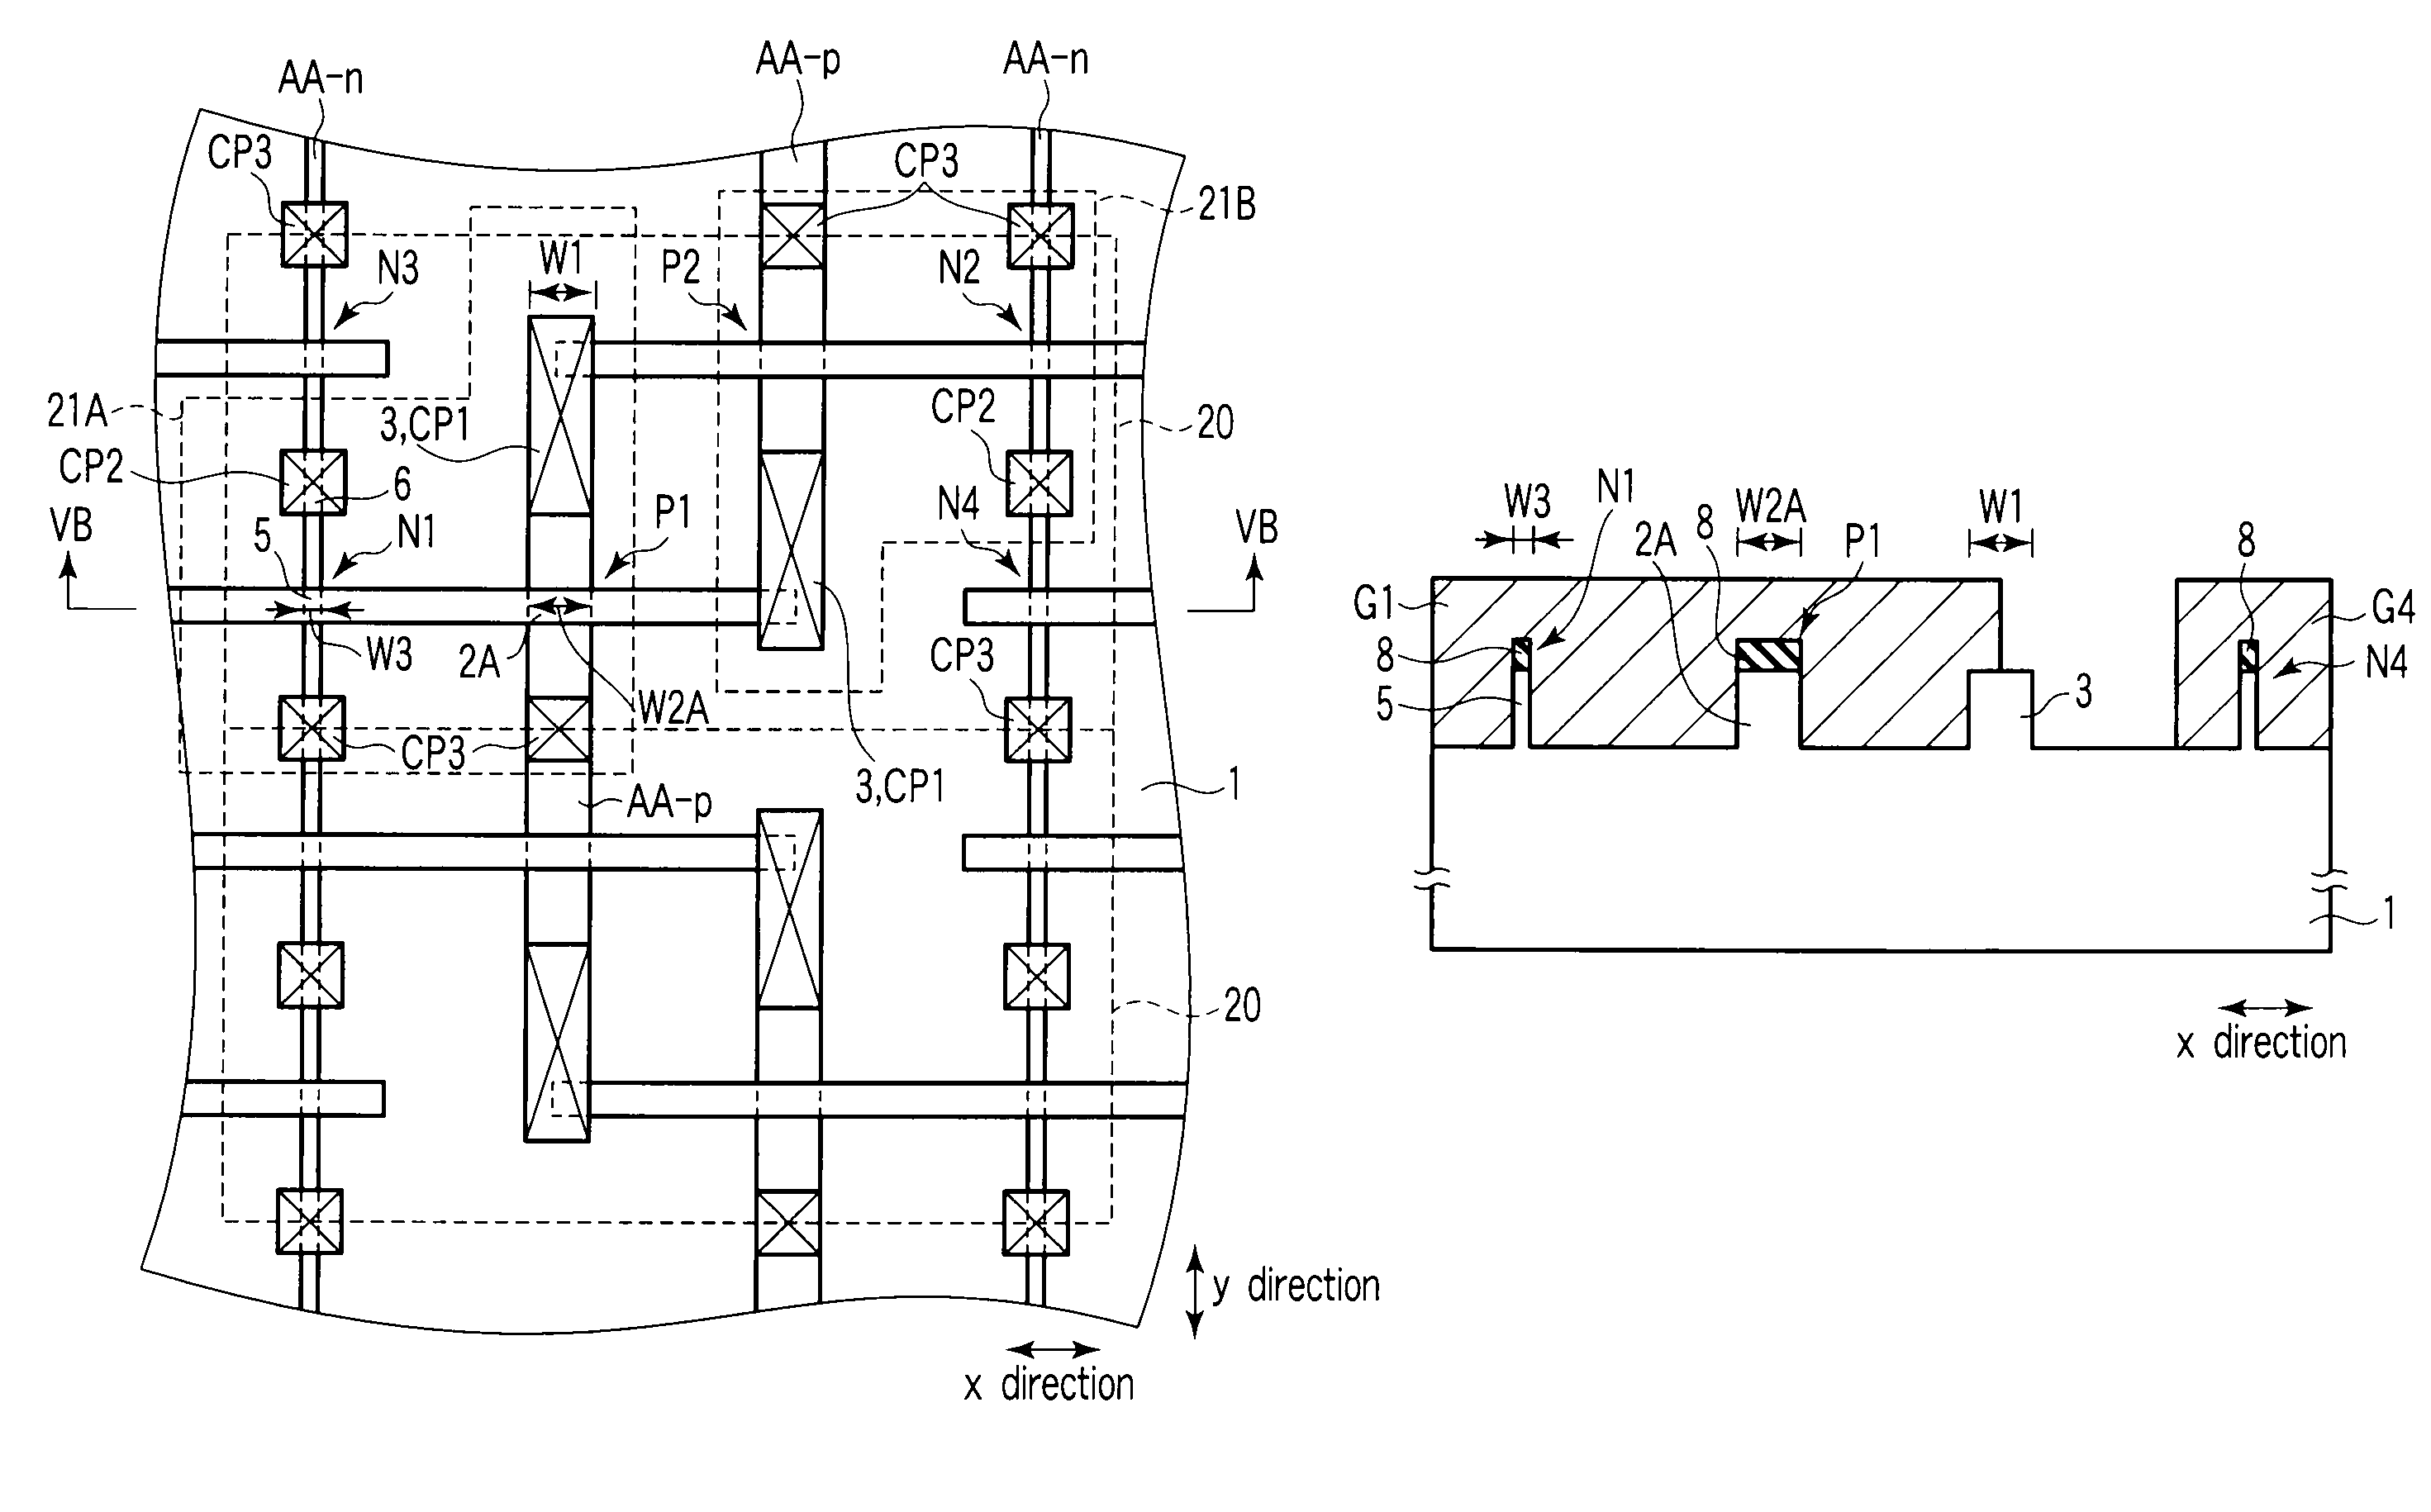 Semiconductor device including n-type and p-type FinFET's constituting an inverter structure